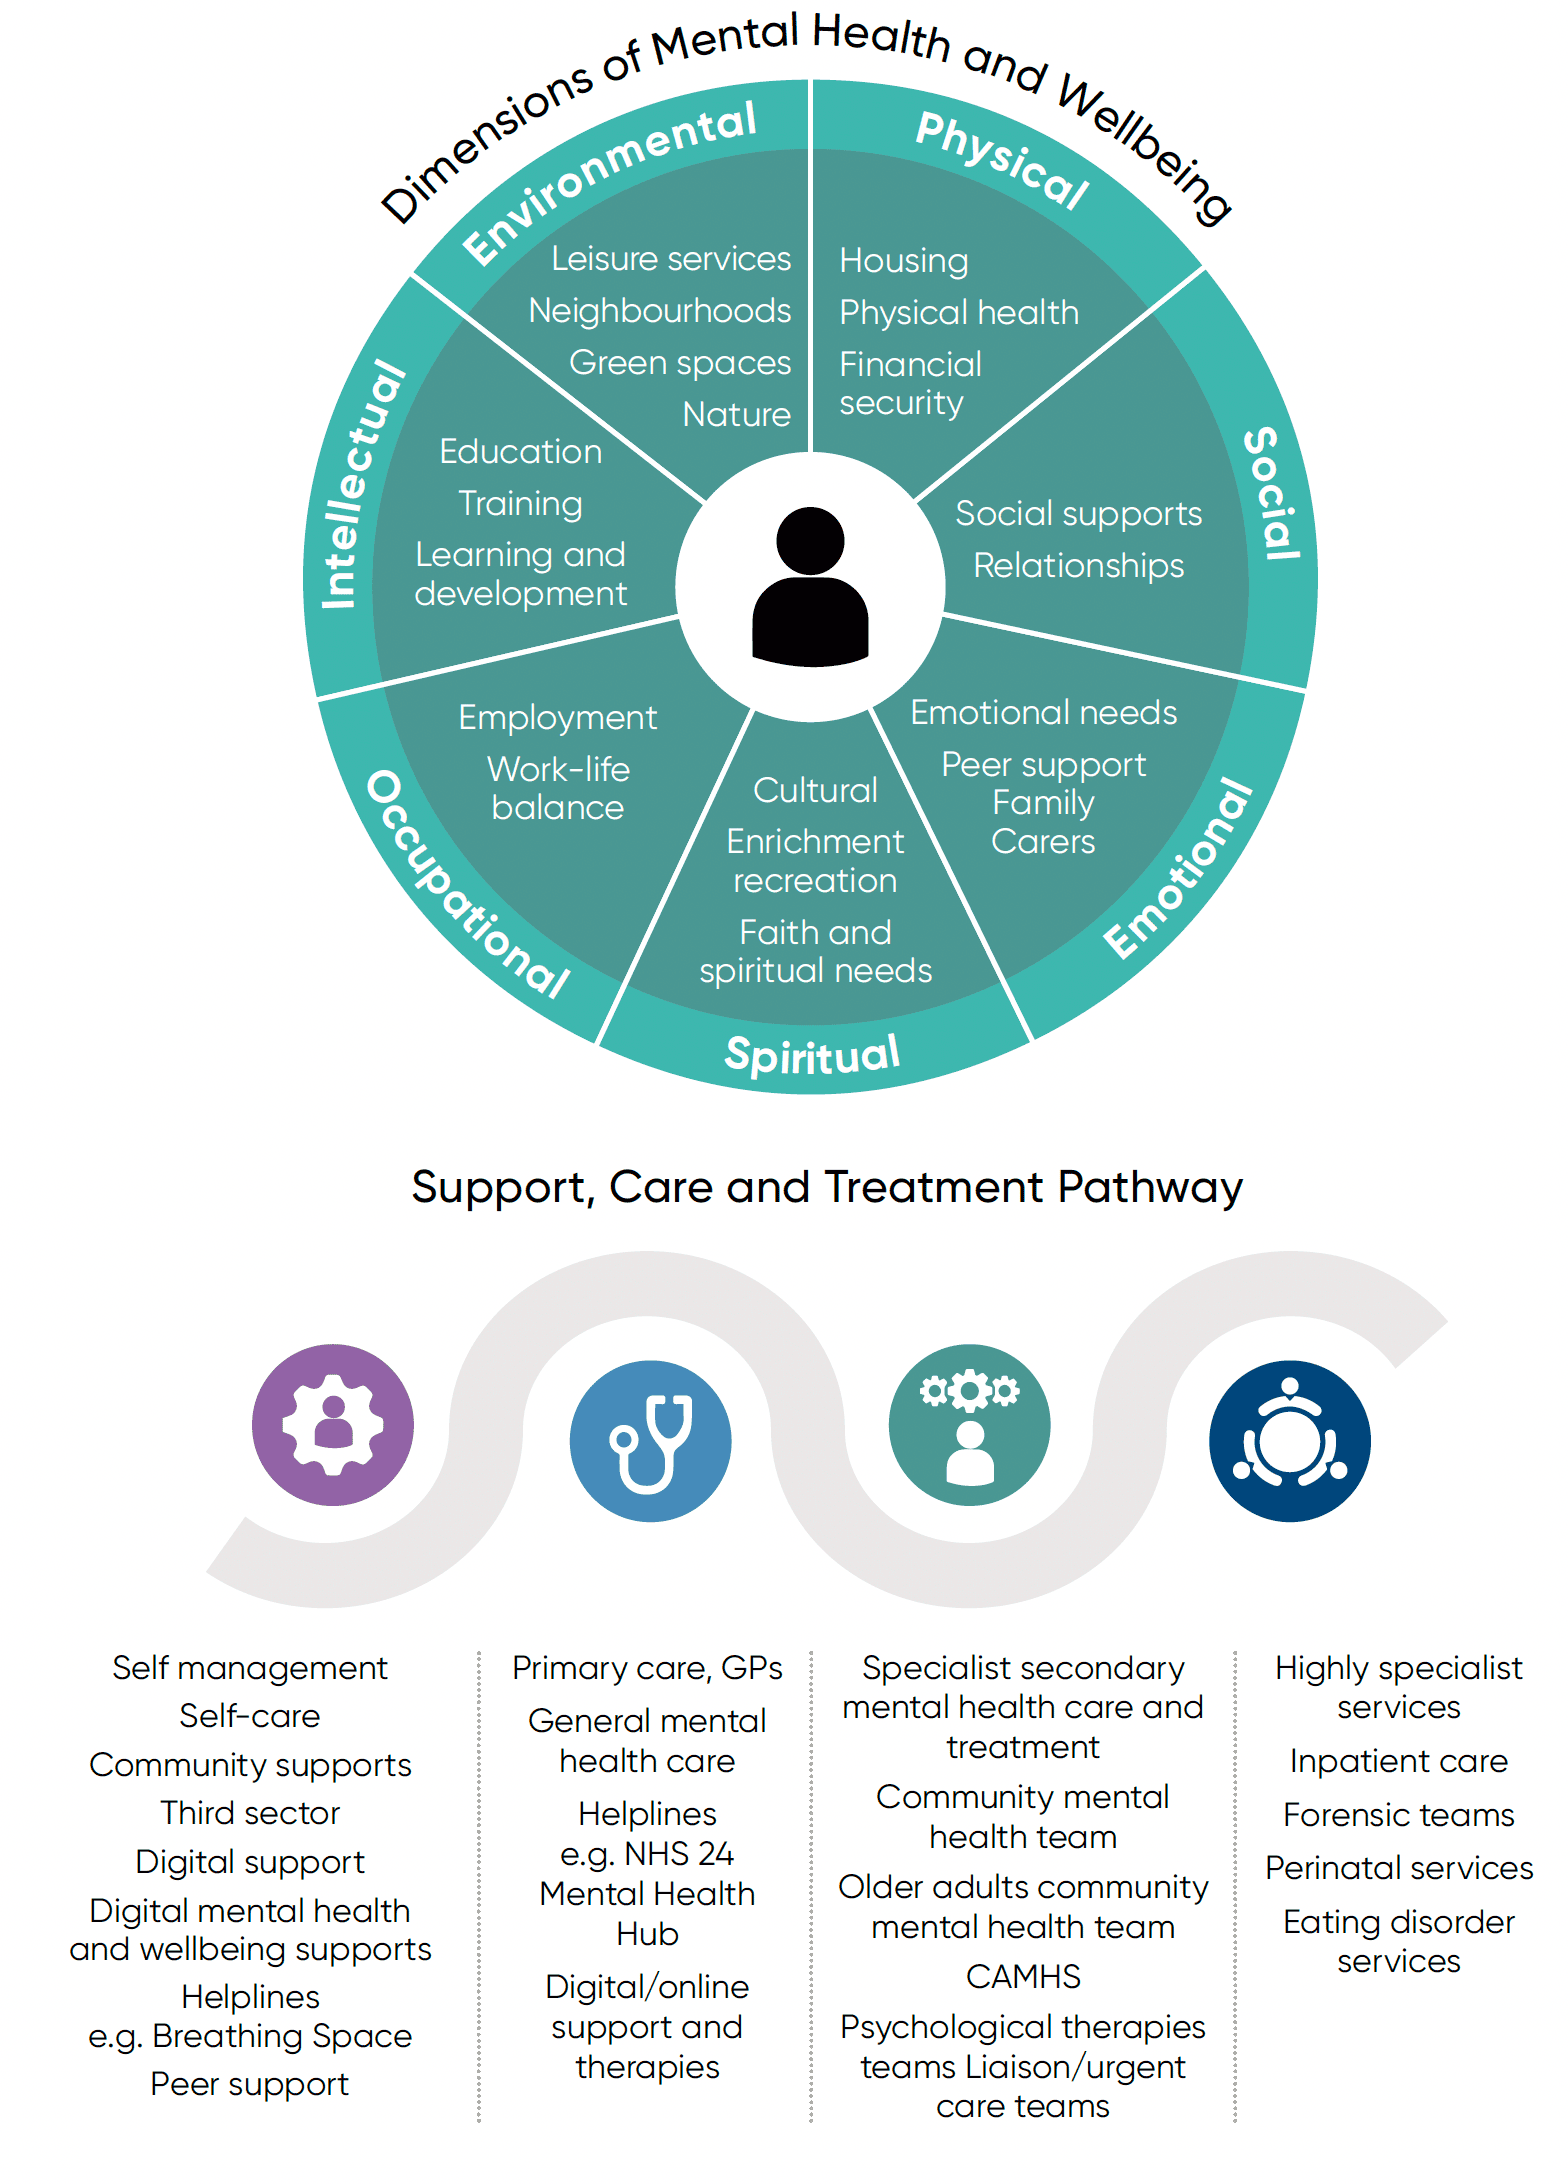 The top part of the model shows the various dimensions of mental health including physical, social, emotional, spiritual, occupational, intellectual and environmental. 
The bottom part of the model shows mental health support, care and treatment options, including peer support, GPs, CAMHS and specialist services. 